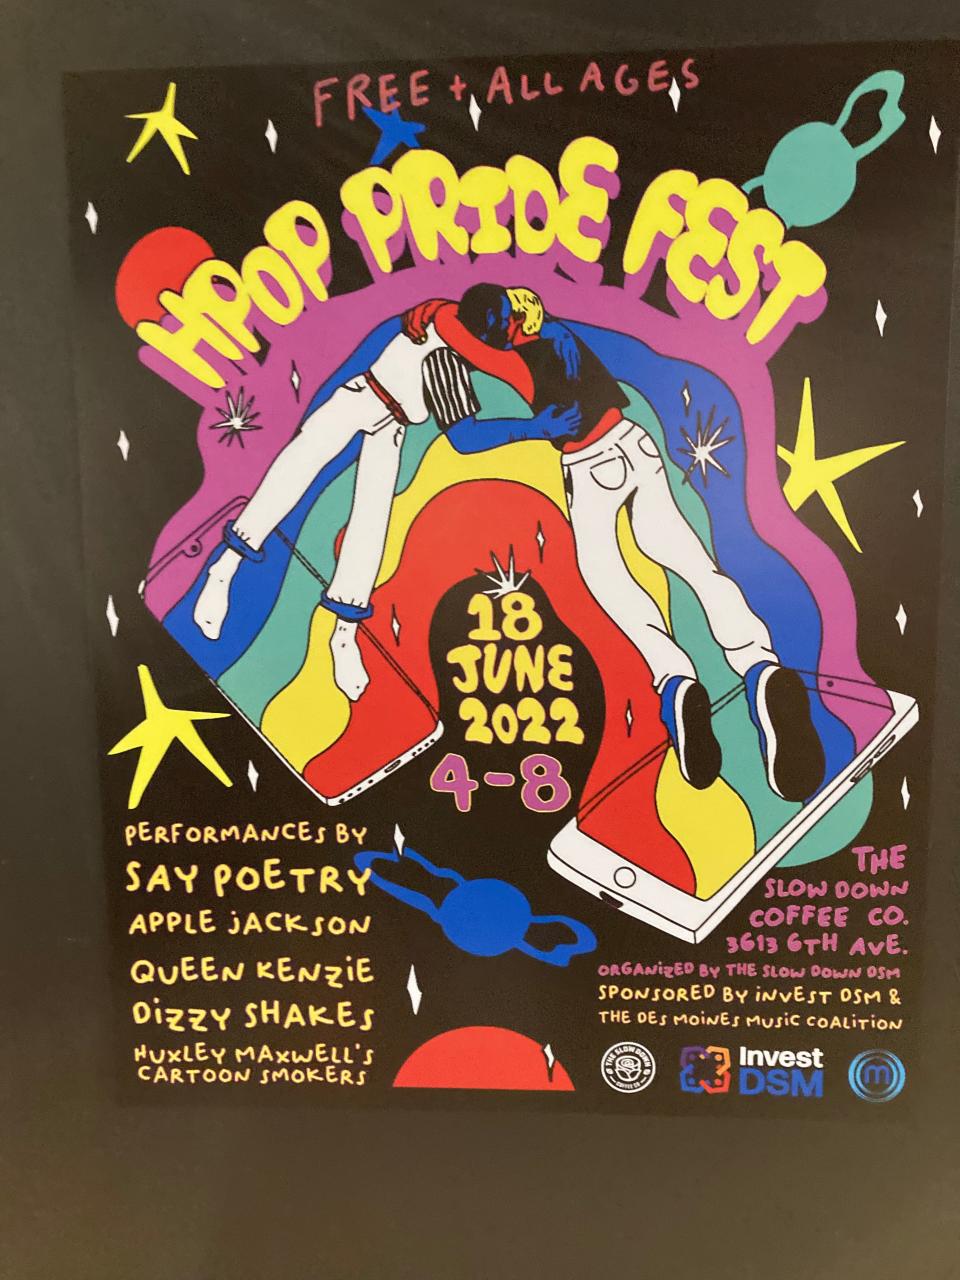 Hpop Pride Fest will debut in the Highland Park neighborhood this year.